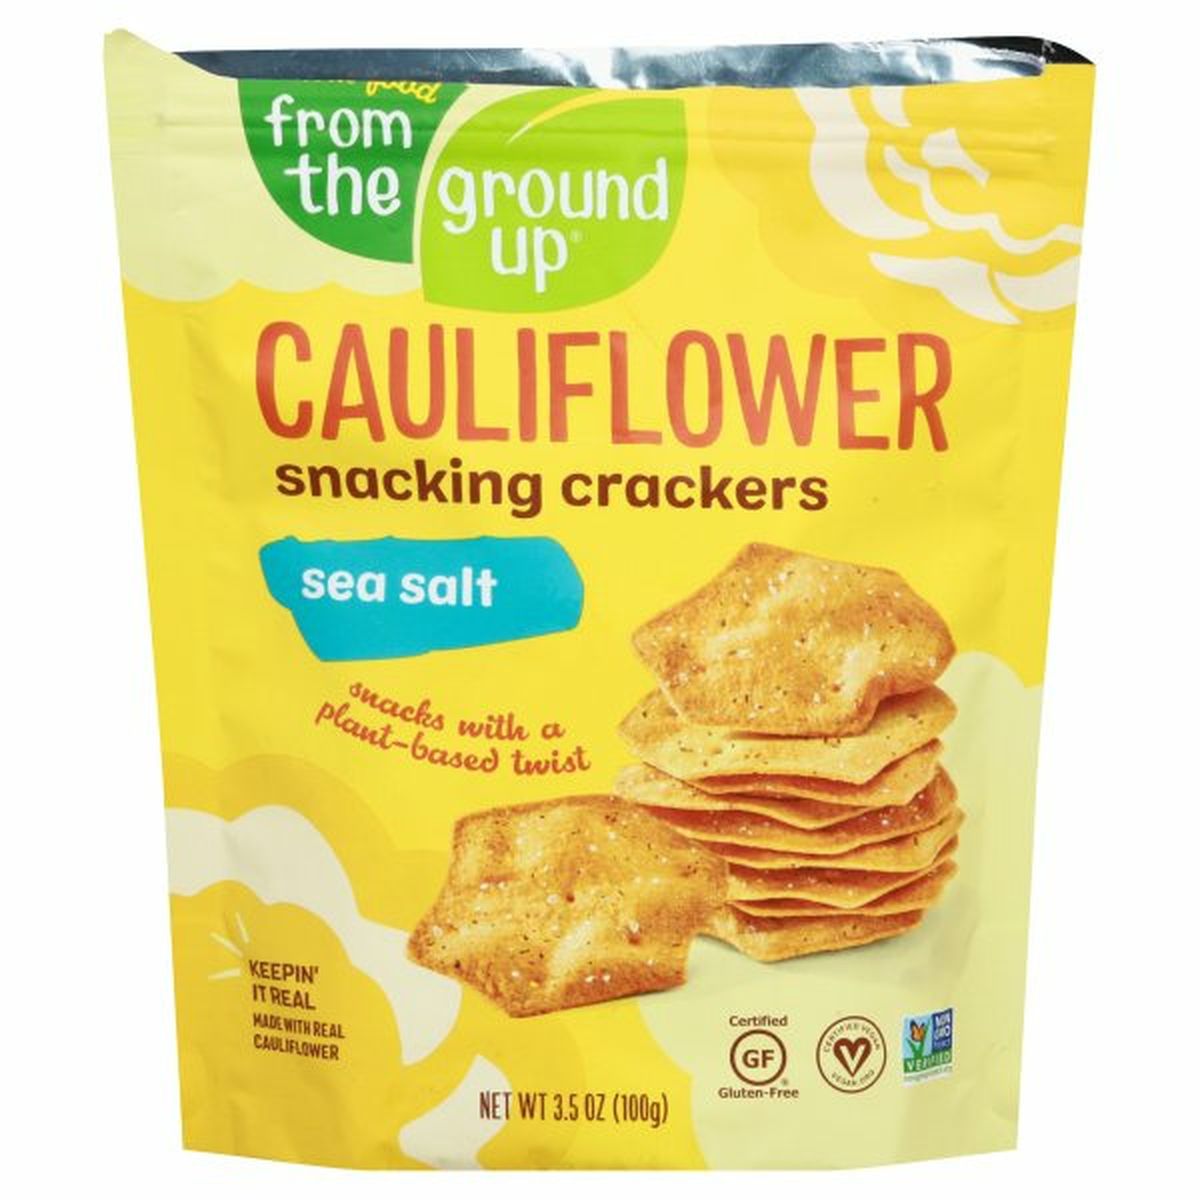 Calories in From the Ground Up Snacking Crackers, Cauliflower, Sea Salt